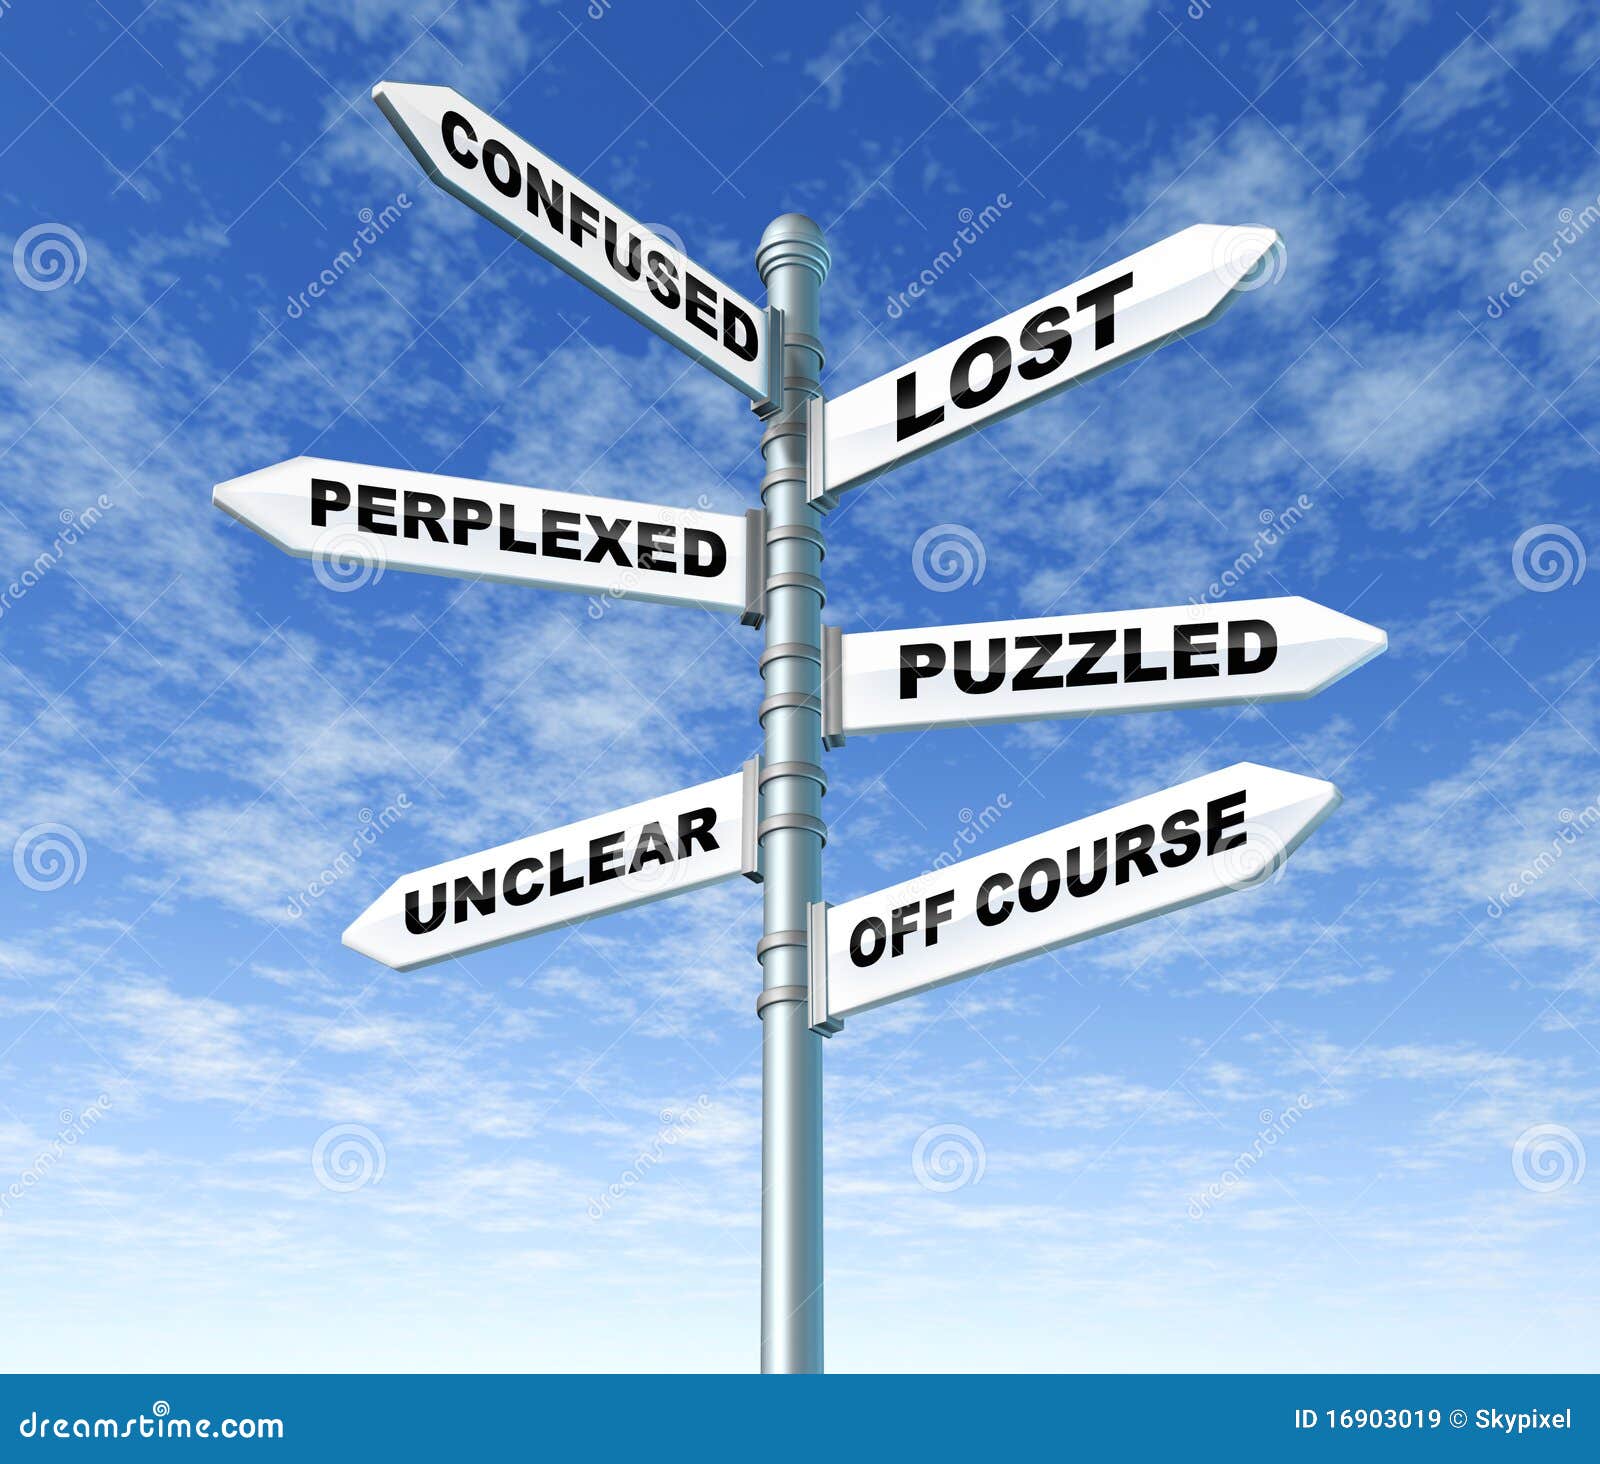 Confused Lost Puzzled Signpost Stock Image - Image of puzzled, confused:  16903019